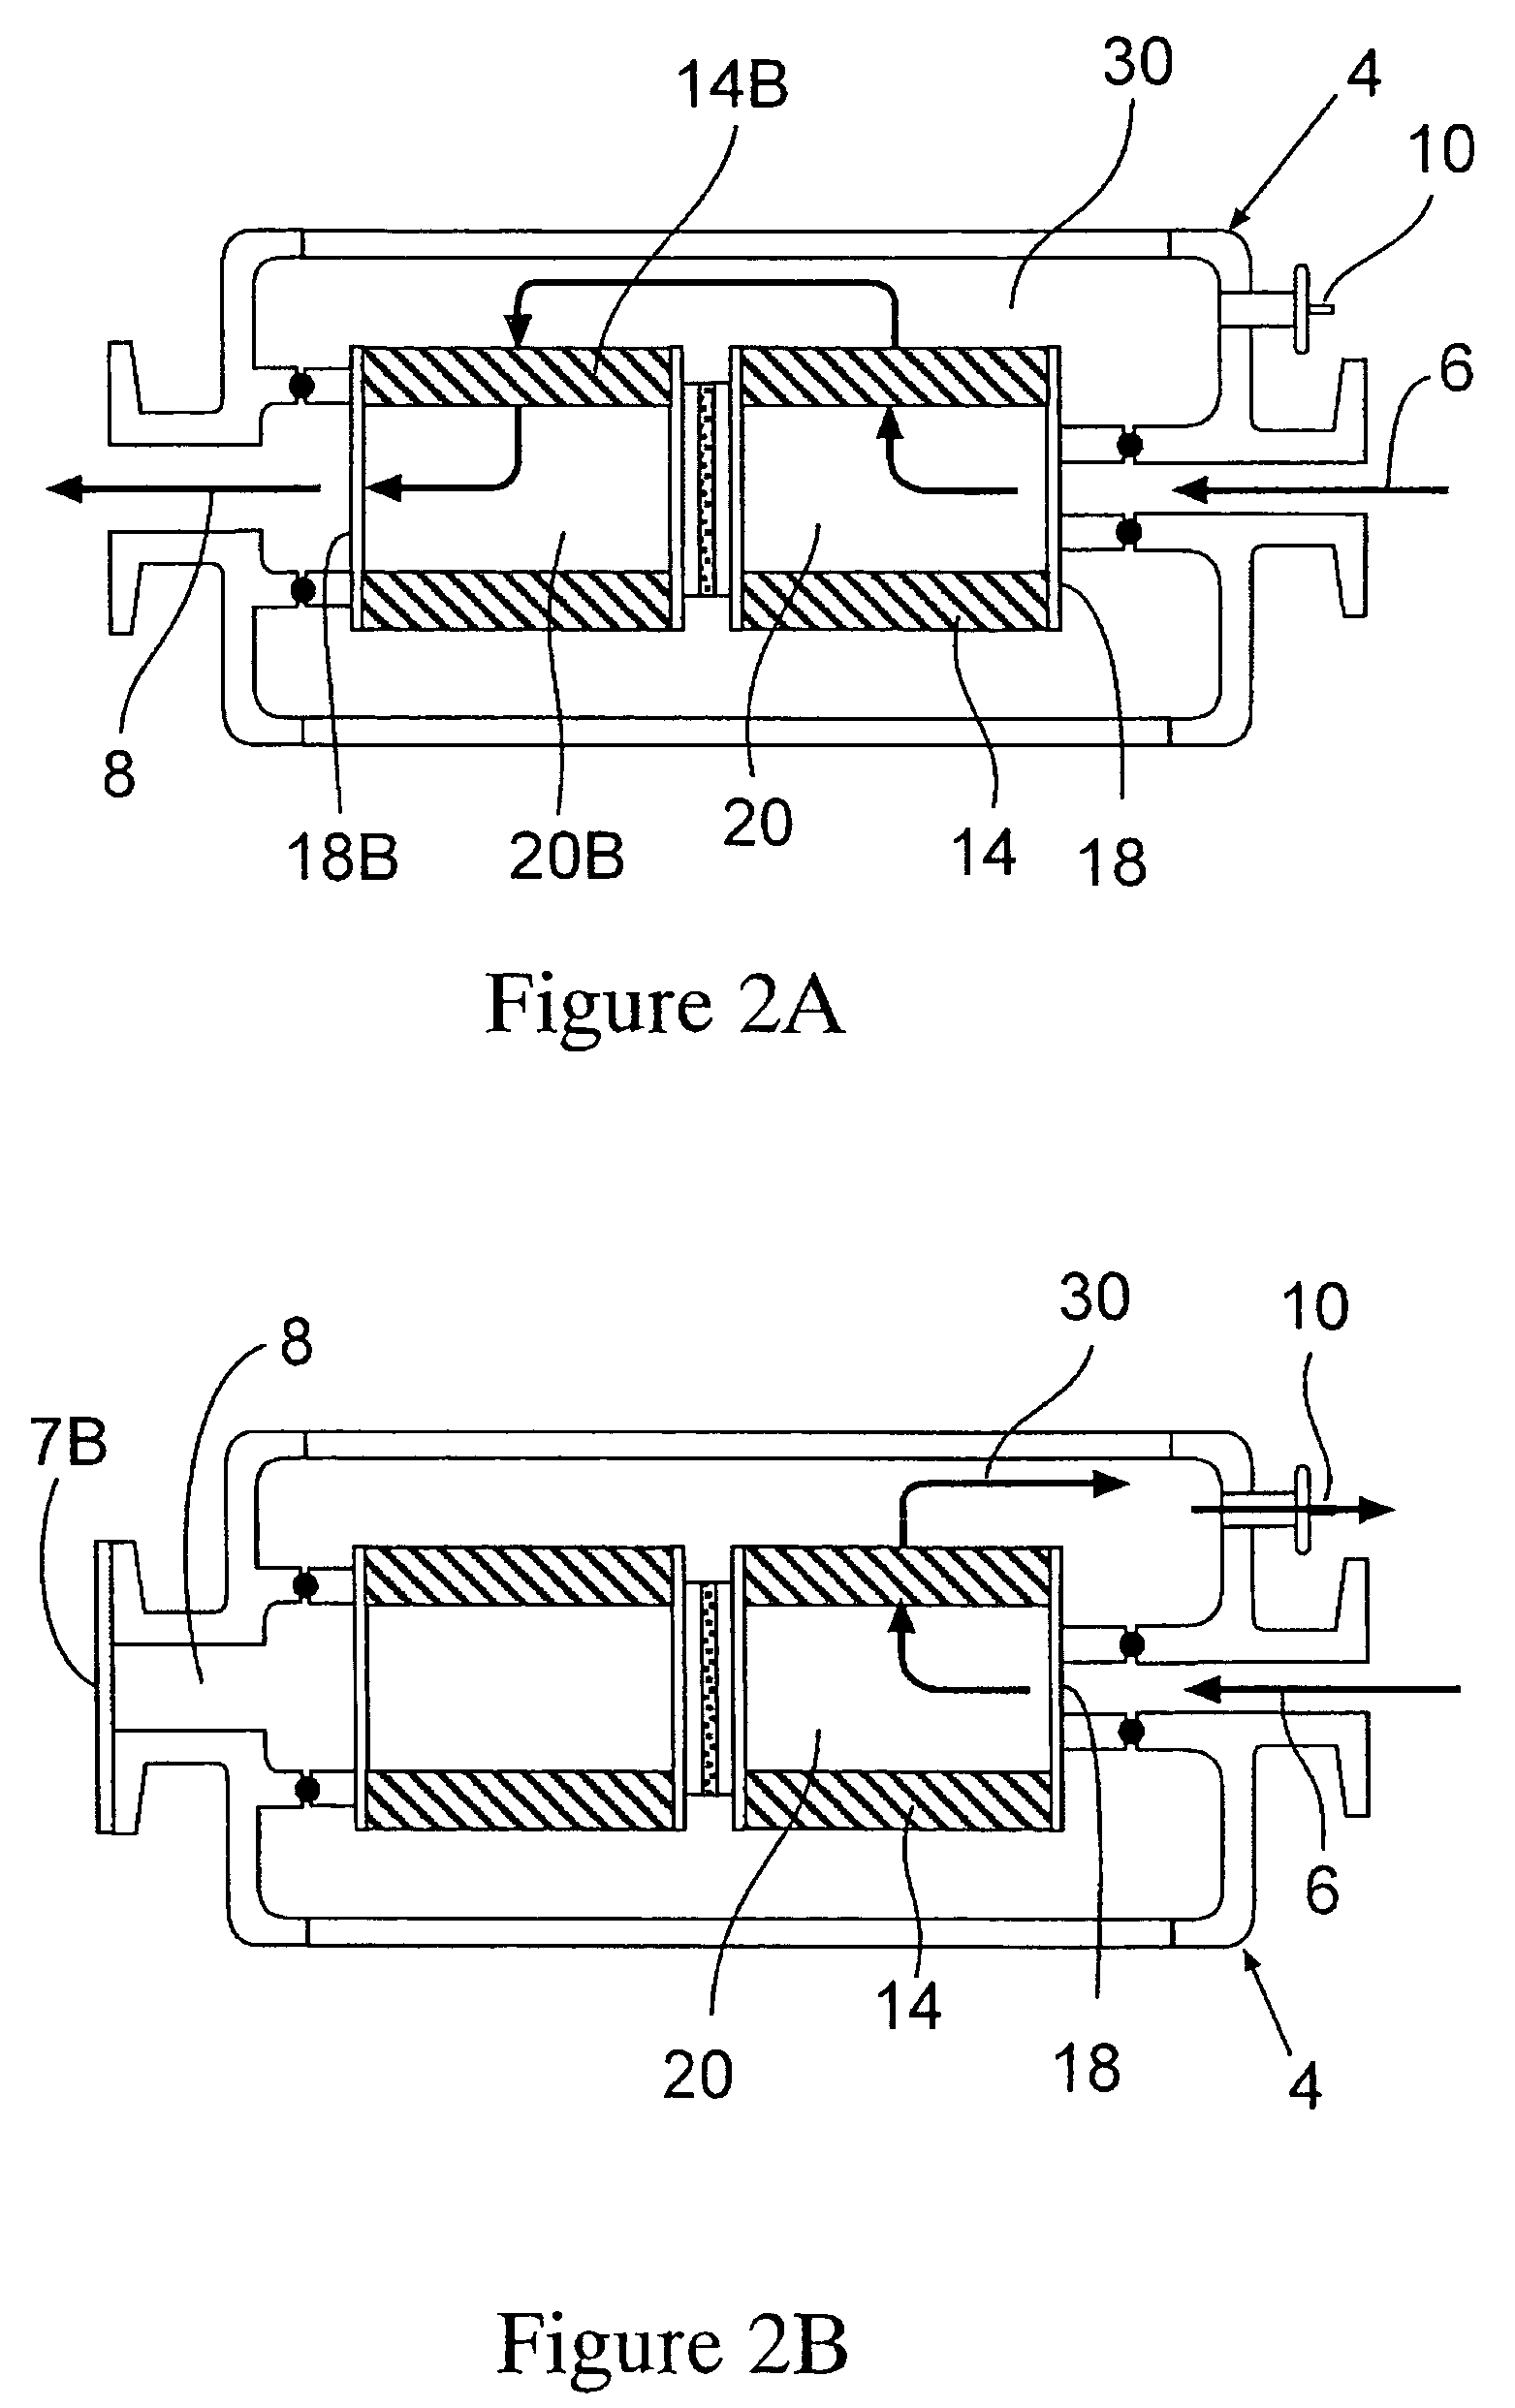 Integrity testable multilayered filter device